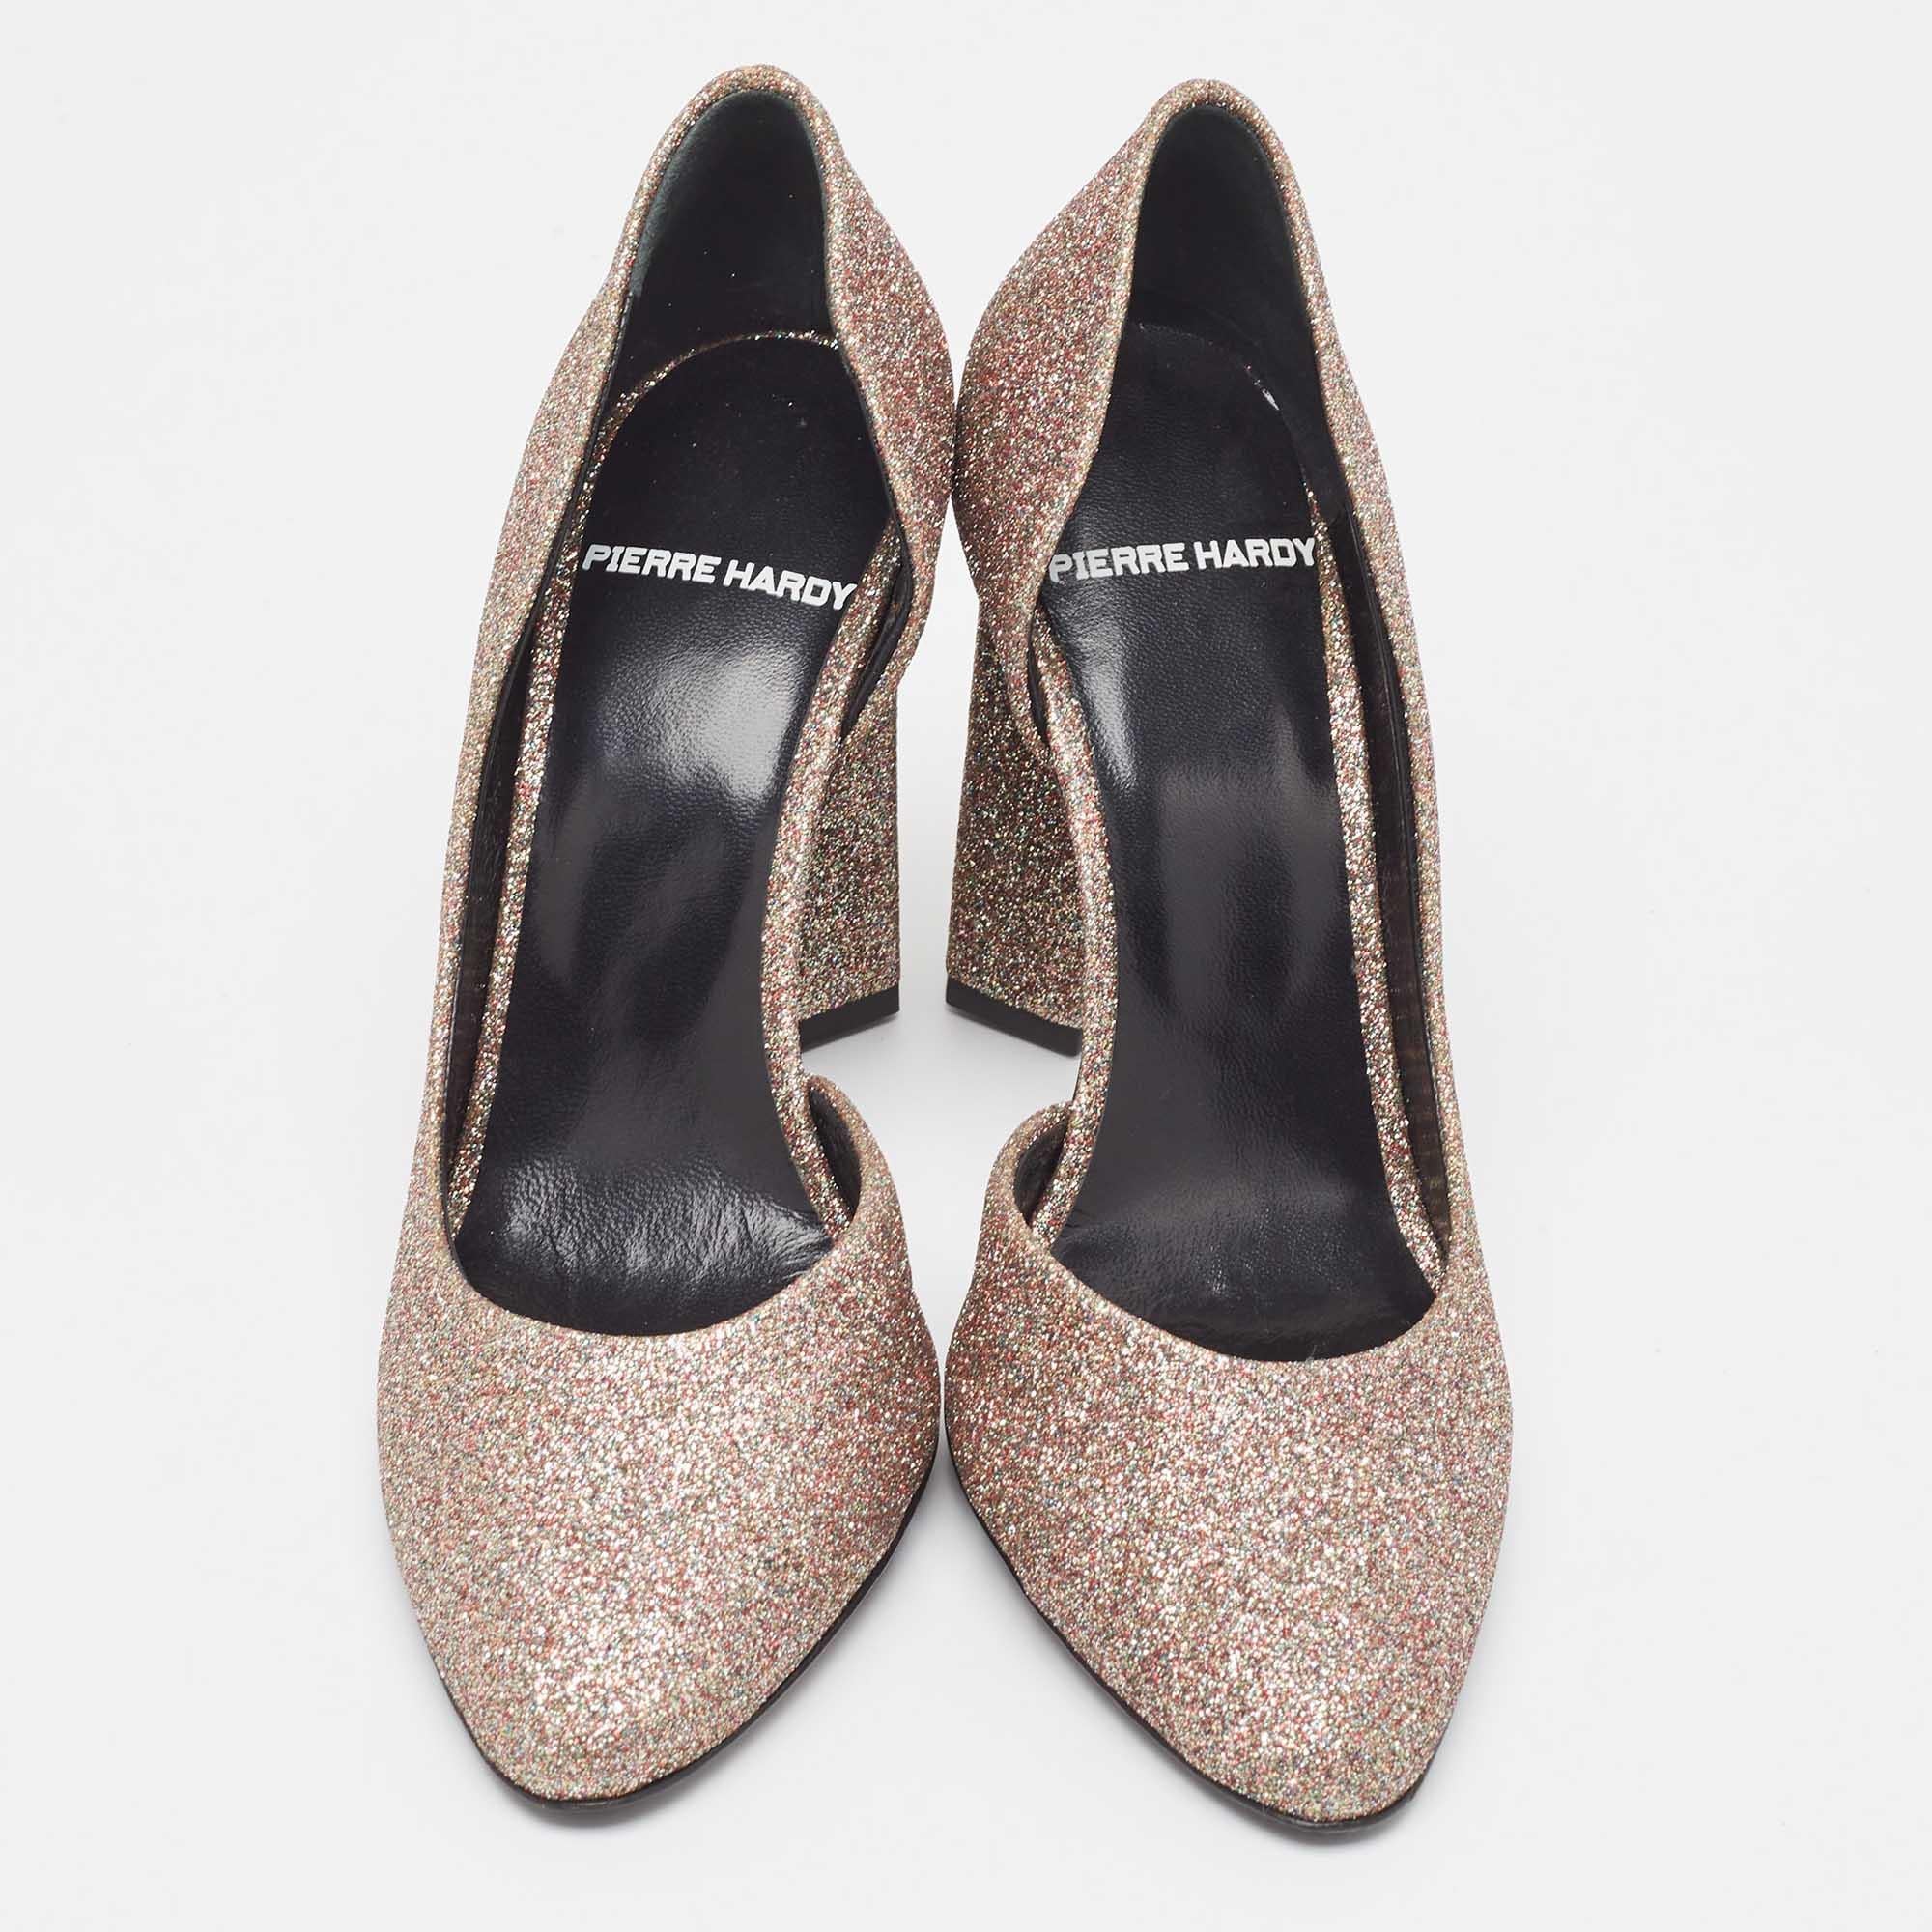 Skilfully crafted from glitter fabric in a D'orsay style with almond toes, these Pierre Hardy pumps come ready to give you a high-fashion experience. These multicolored pumps are balanced on 9.5cm heels and finished with comfortable insoles.